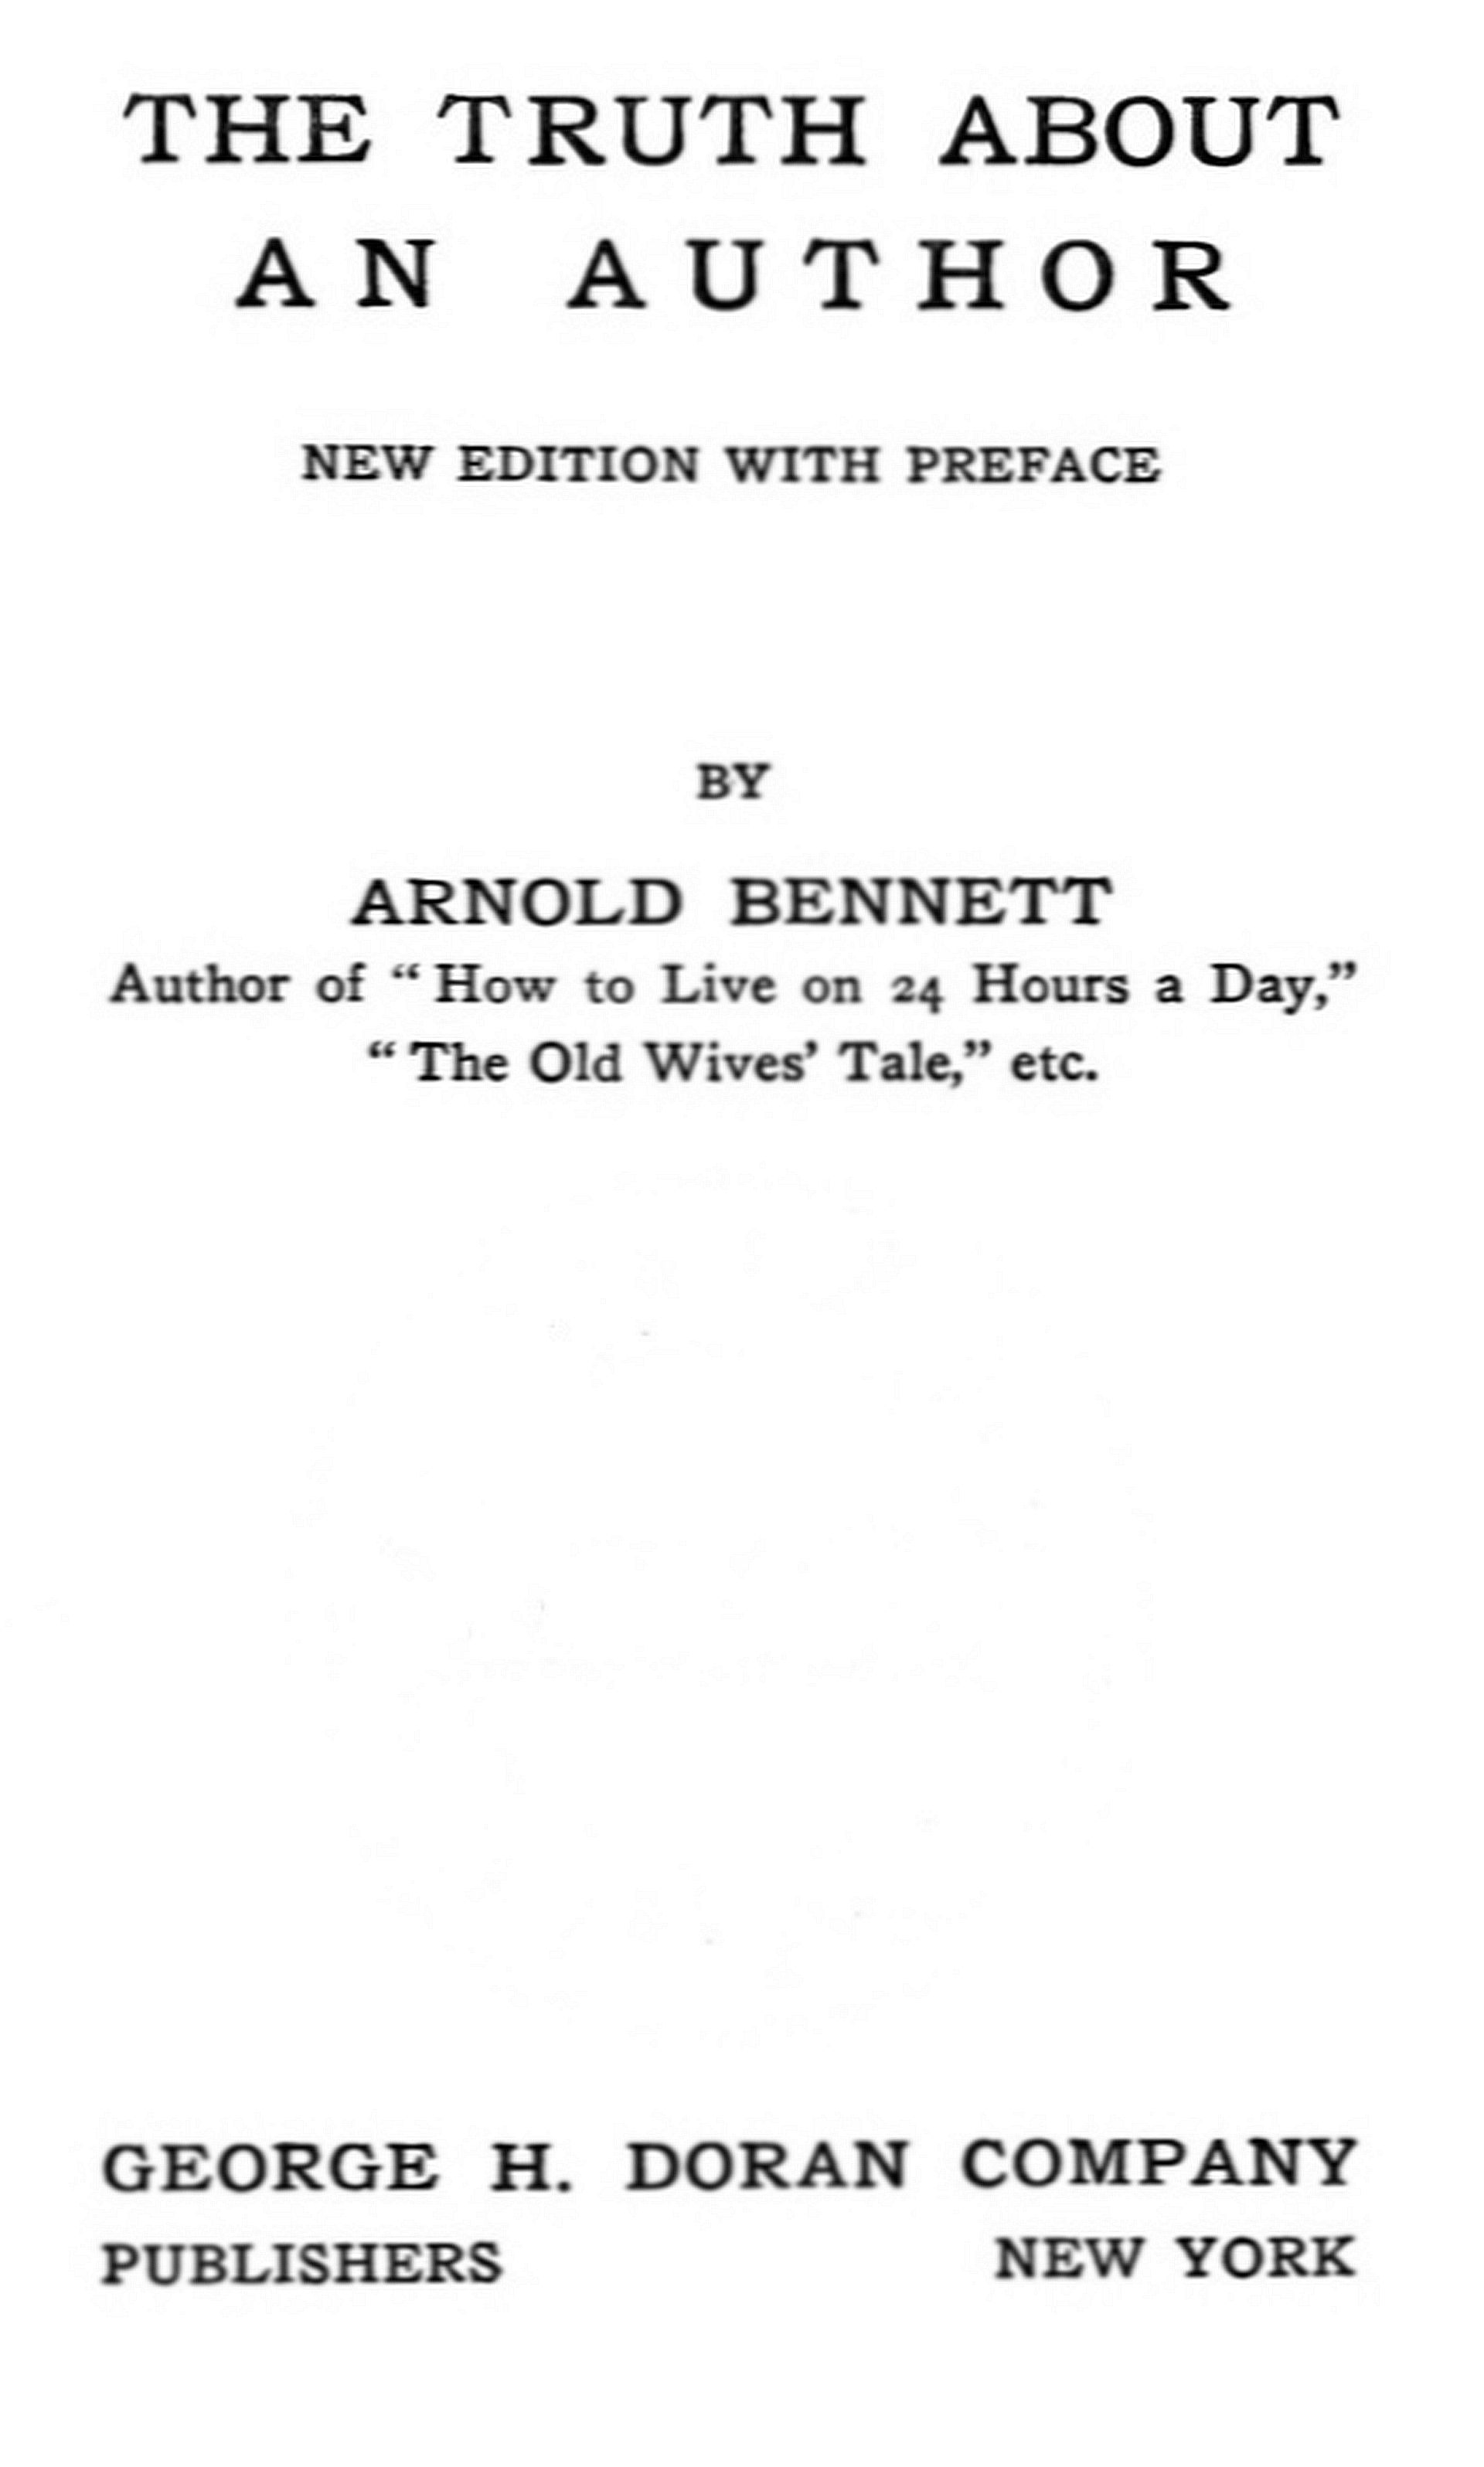 The Project Gutenberg eBook of The Truth about an Author, by Arnold Bennett.